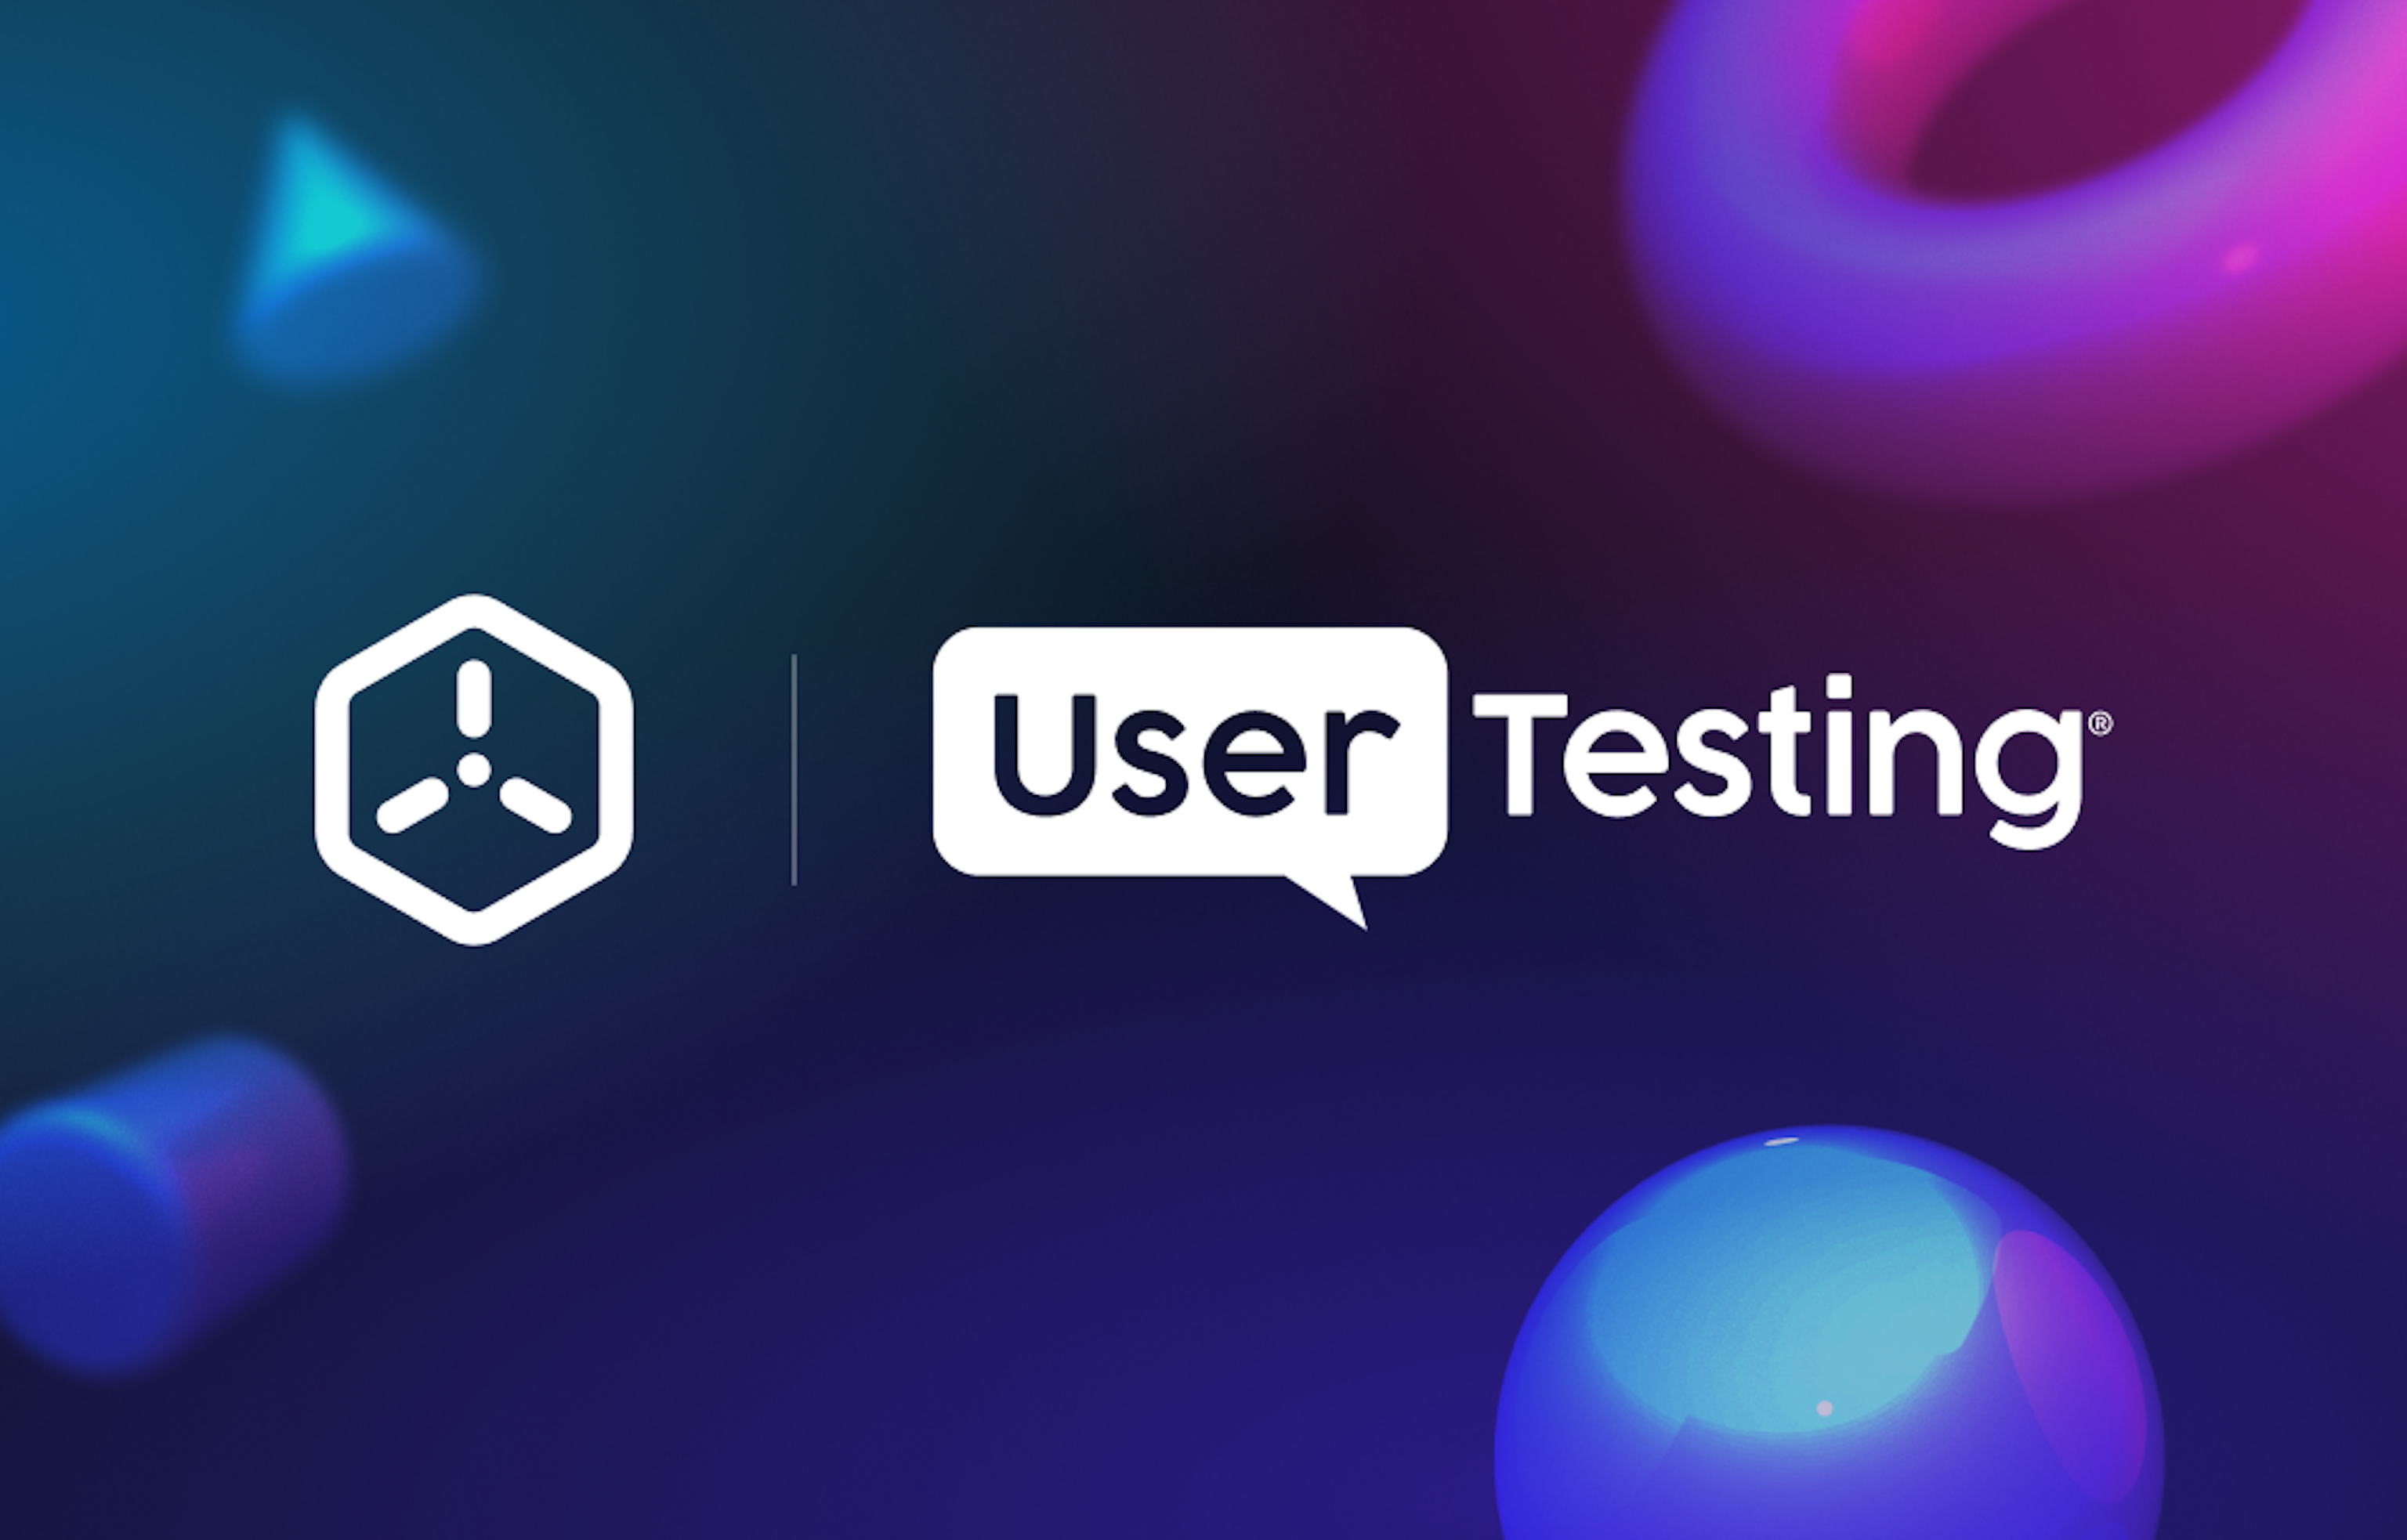 UserTesting and Sceneri: A Game-Changing Collaboration for User Experience